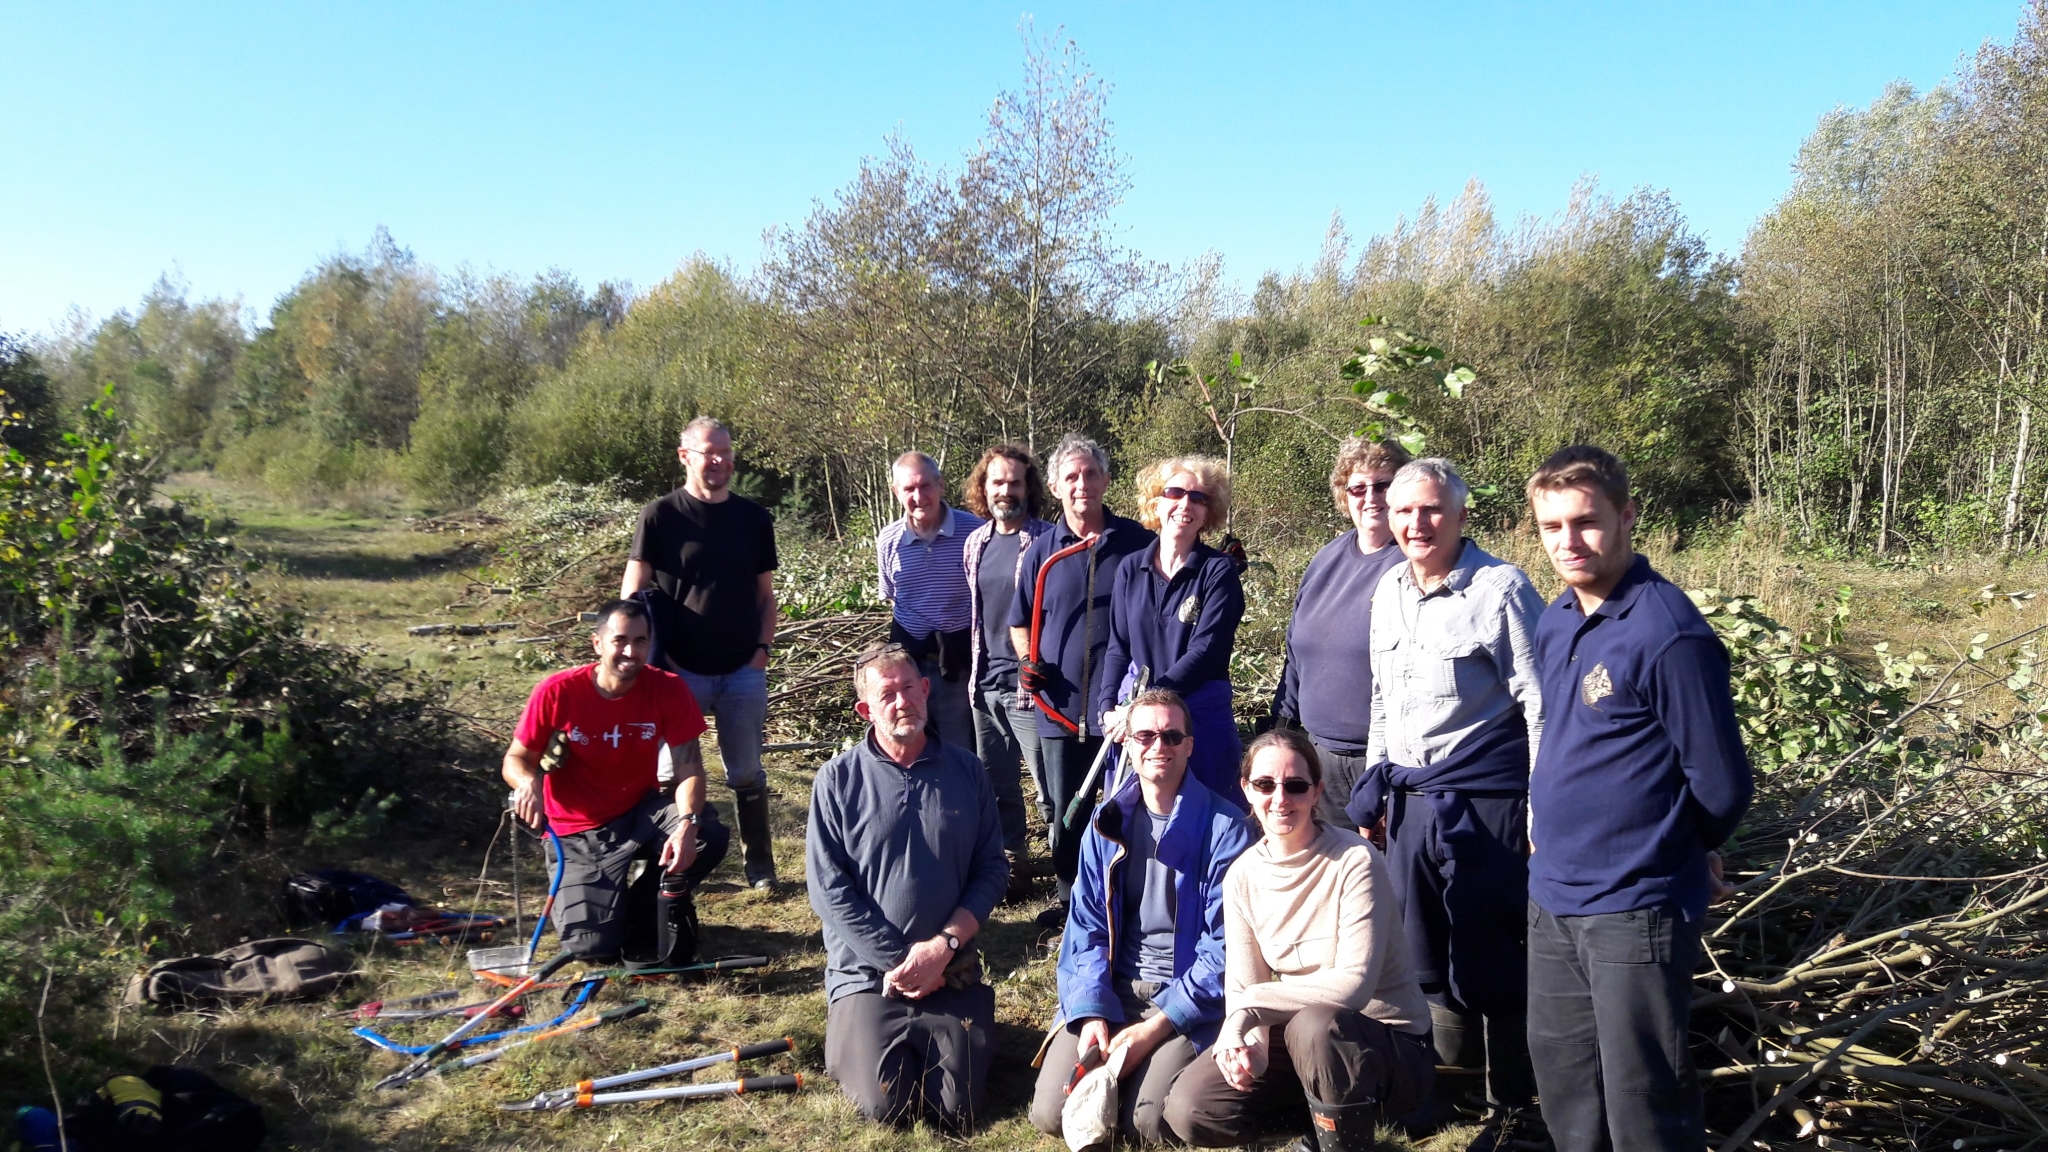 A photo from the FoTF Conservation Event - October 2018 - Undetaking clearance at the Lynford Lake Waters Edge : A team shot of the FoTF Conservation Group volunteers on the October 2018 event